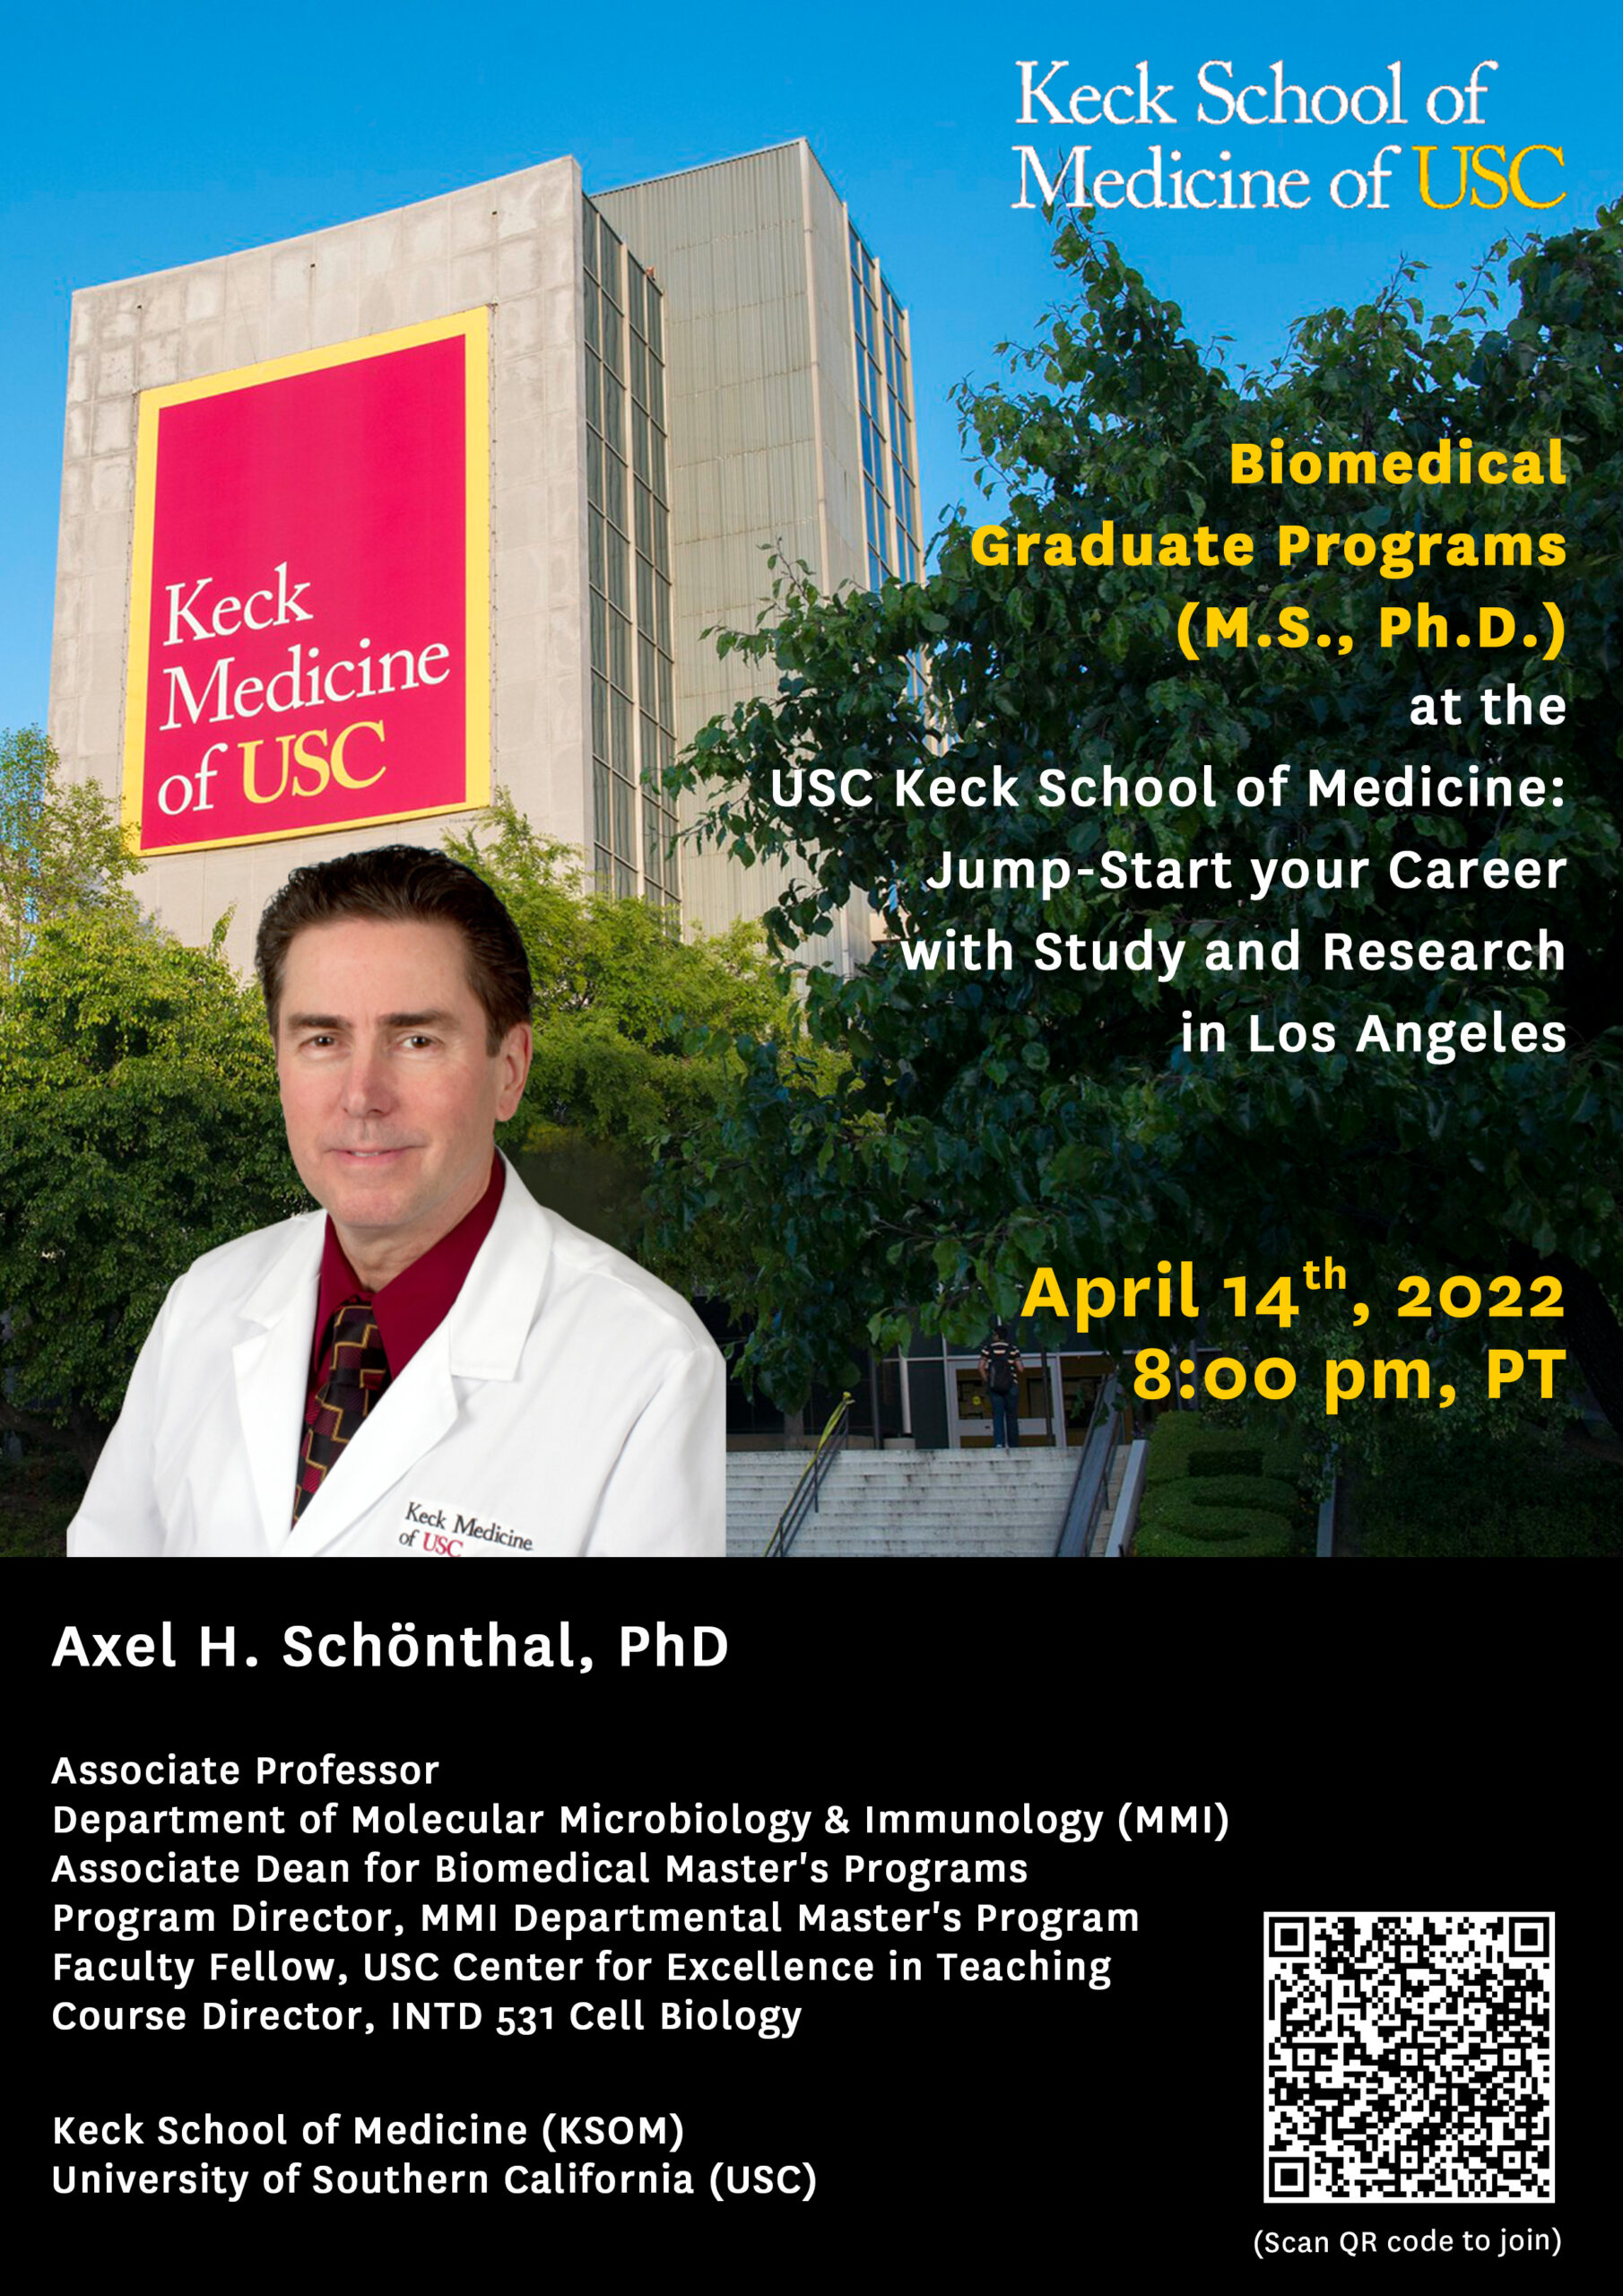 Biomedical Graduate Programs (M.S., Ph.D.) at the USC Keck School of Medicine: Jump-Start your Career with Study and Research in Los Angeles